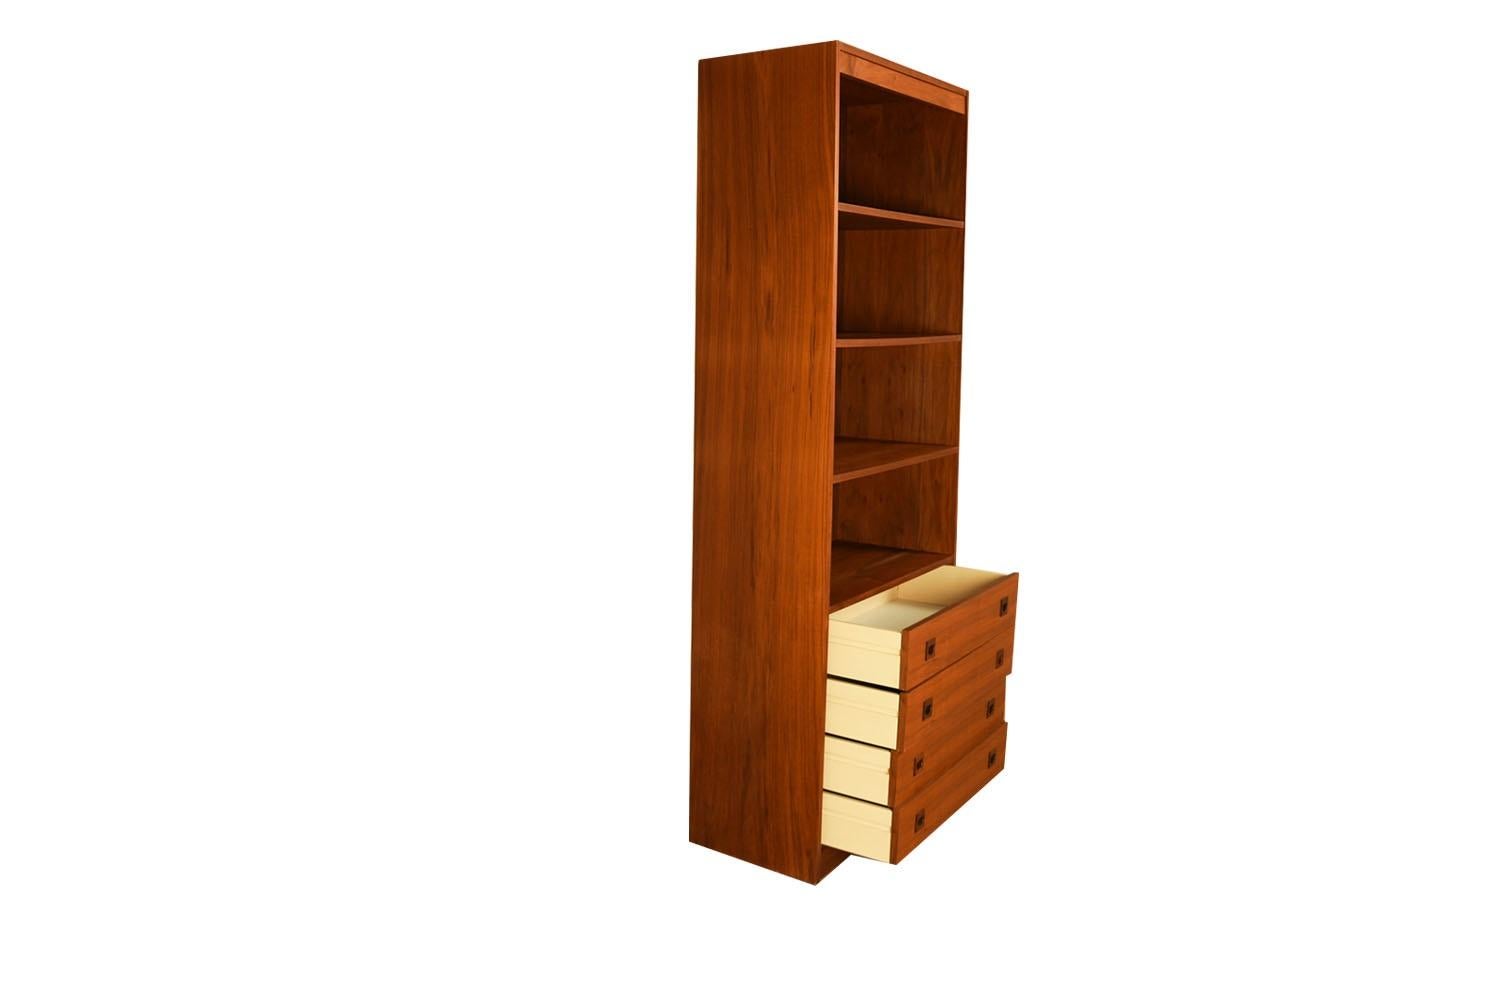 Fantastic mid-century walnut two-piece, bookcase storage cabinet / hutch. This amazing vintage bookcase and storage cabinet features an upper open bookcase with three removable shelves, below are four spacious drawers. The bookcase rests on a modern